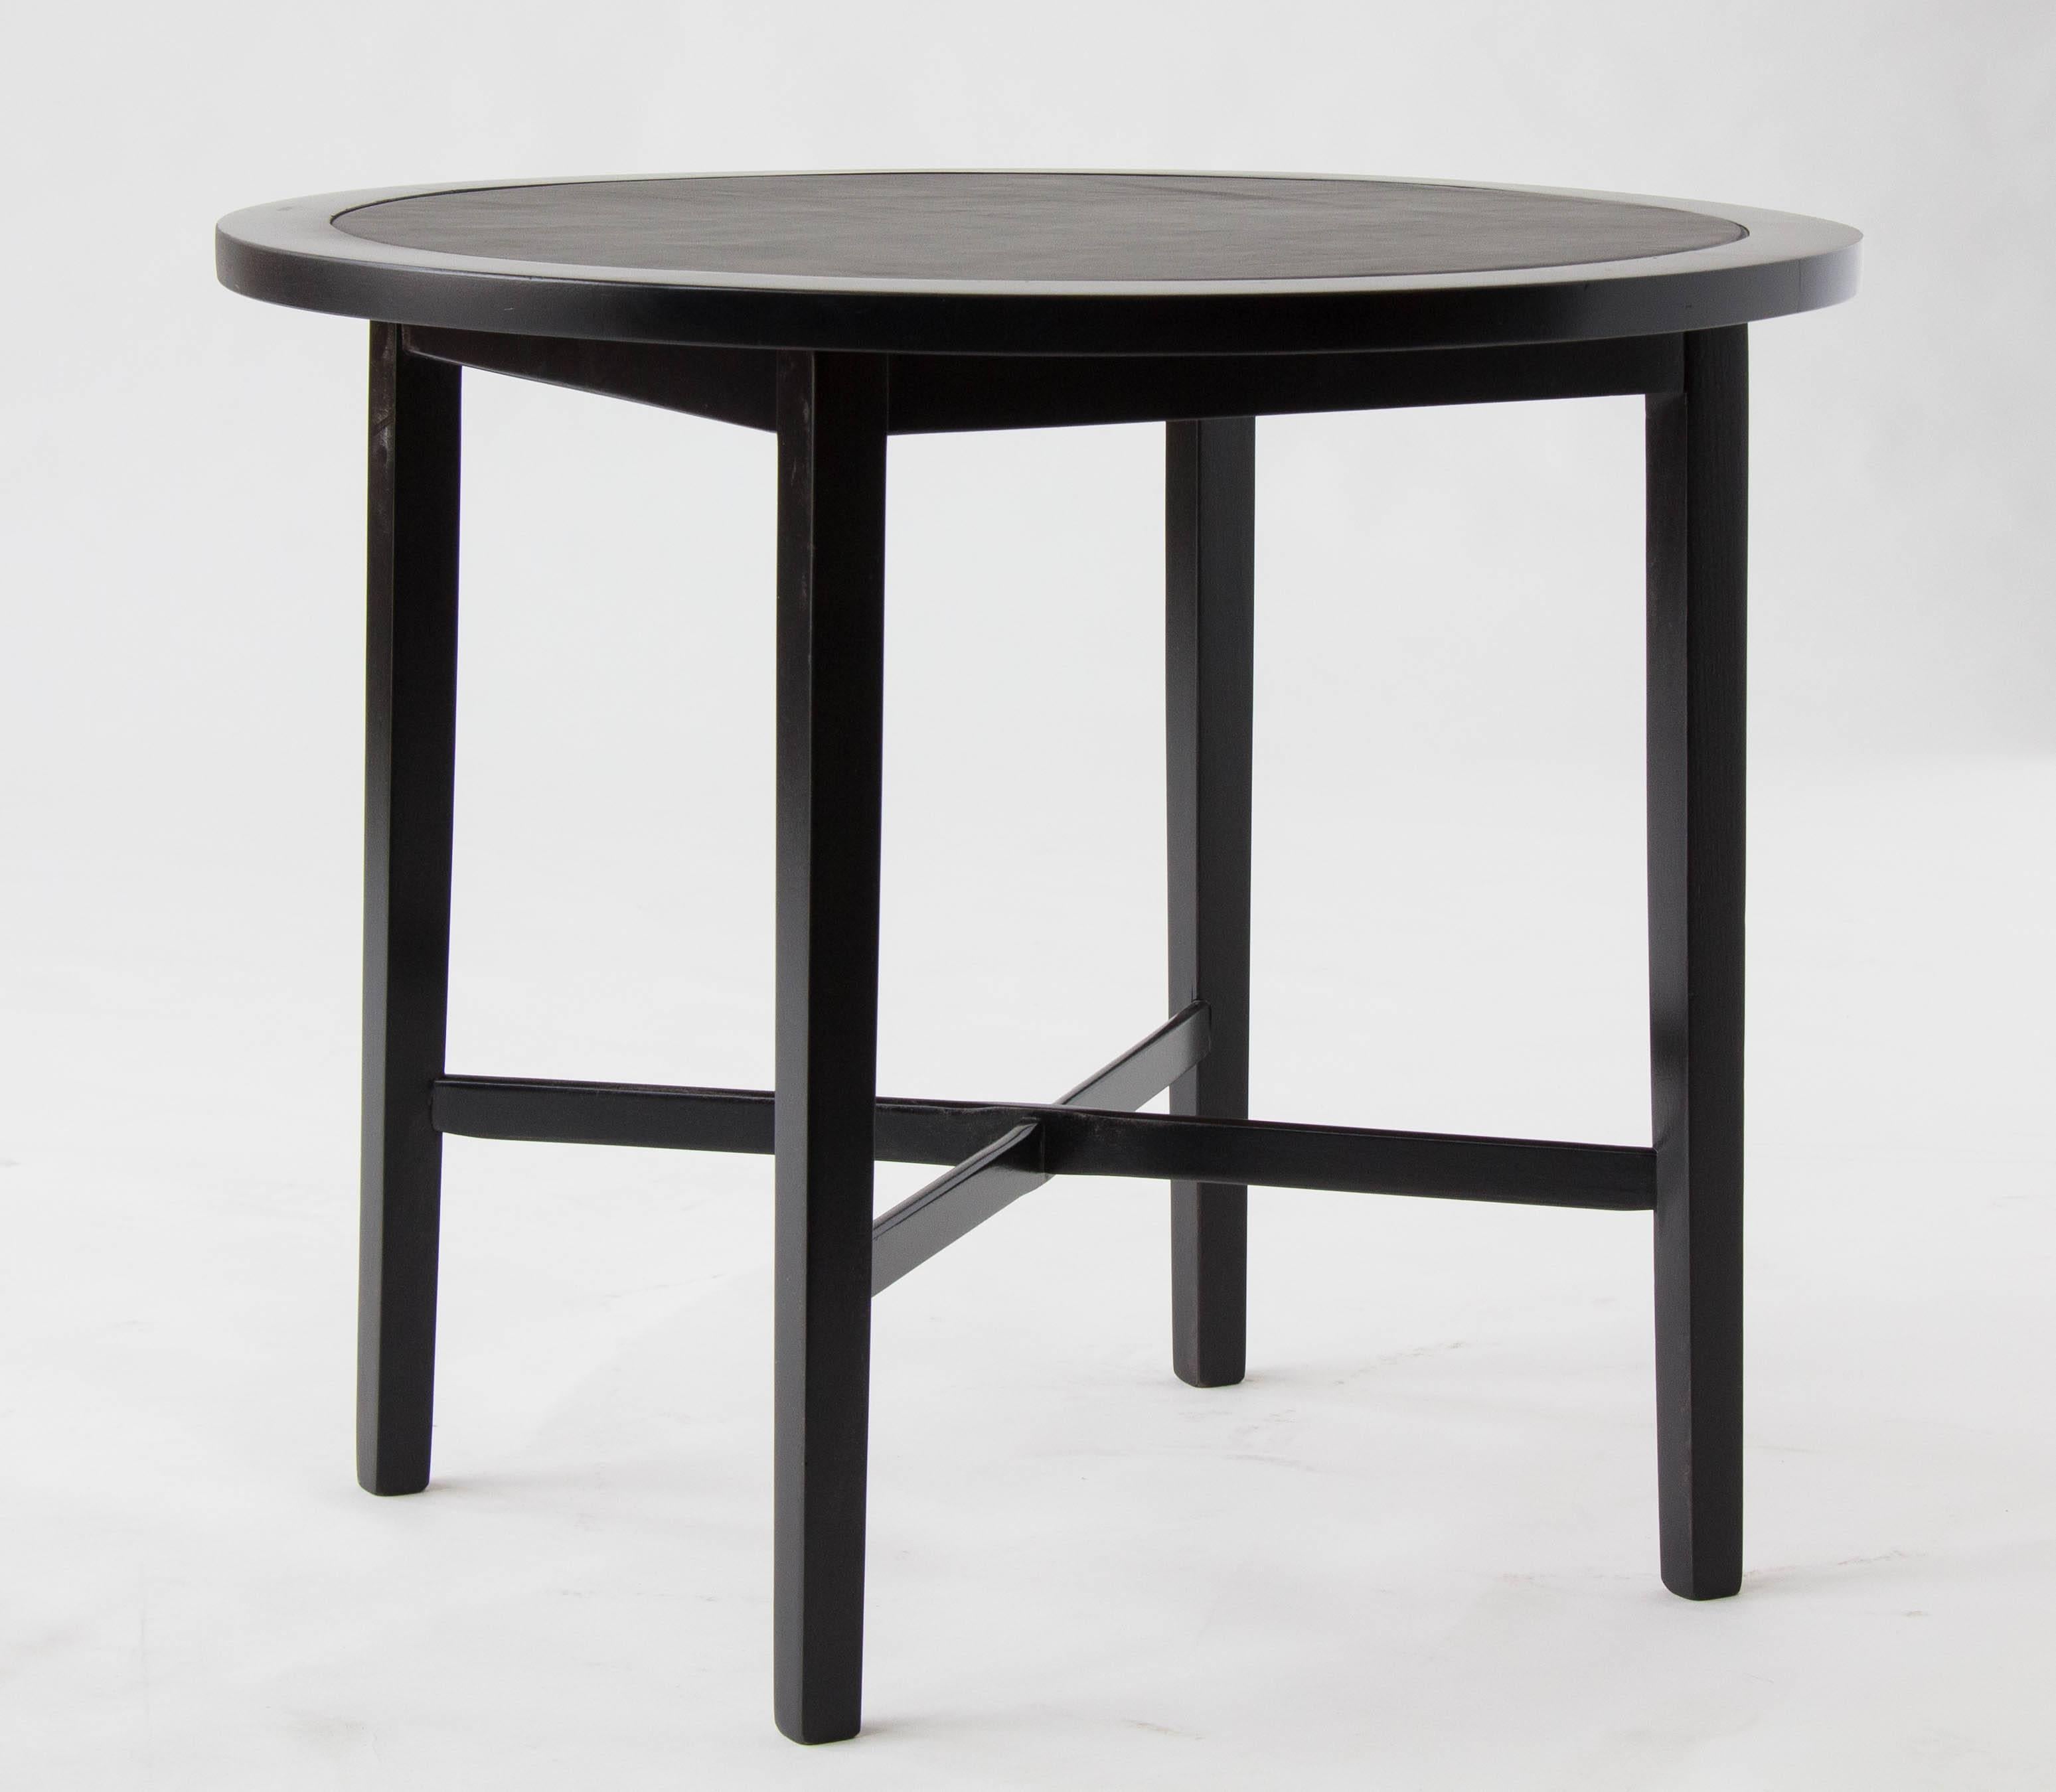 A round side table from the perimeter group, designed by Paul McCobb for Winchendon Furniture in 1959. The table has an ebonized frame around a leather covered tabletop. The delicate frame has four legs with cross supports in an X formation. The